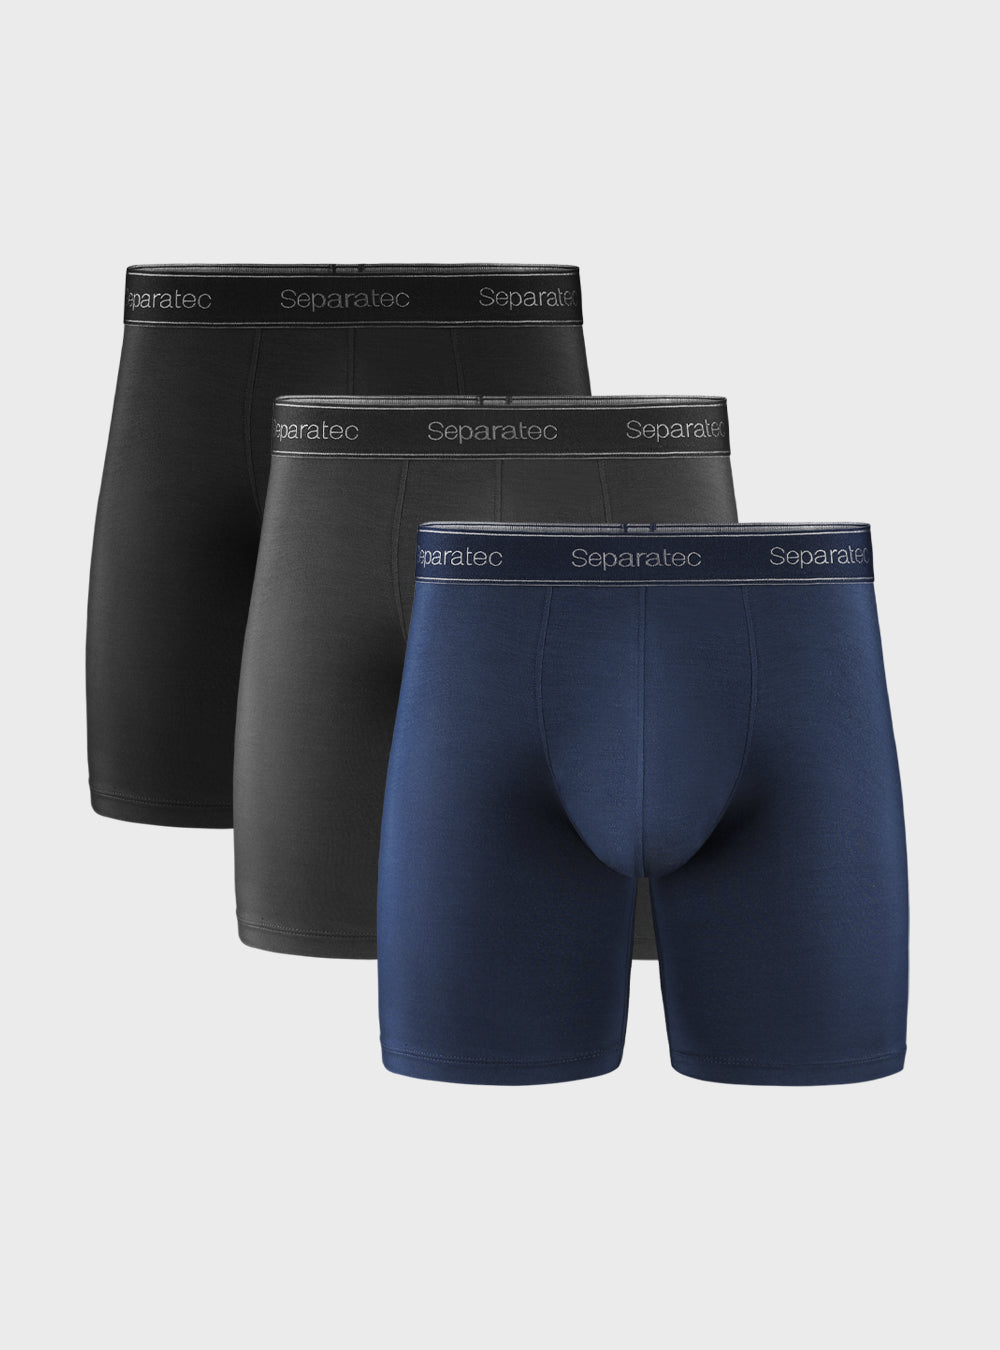 Classic Style Micro Modal Soft 8 inches Boxer Briefs 3 Pack